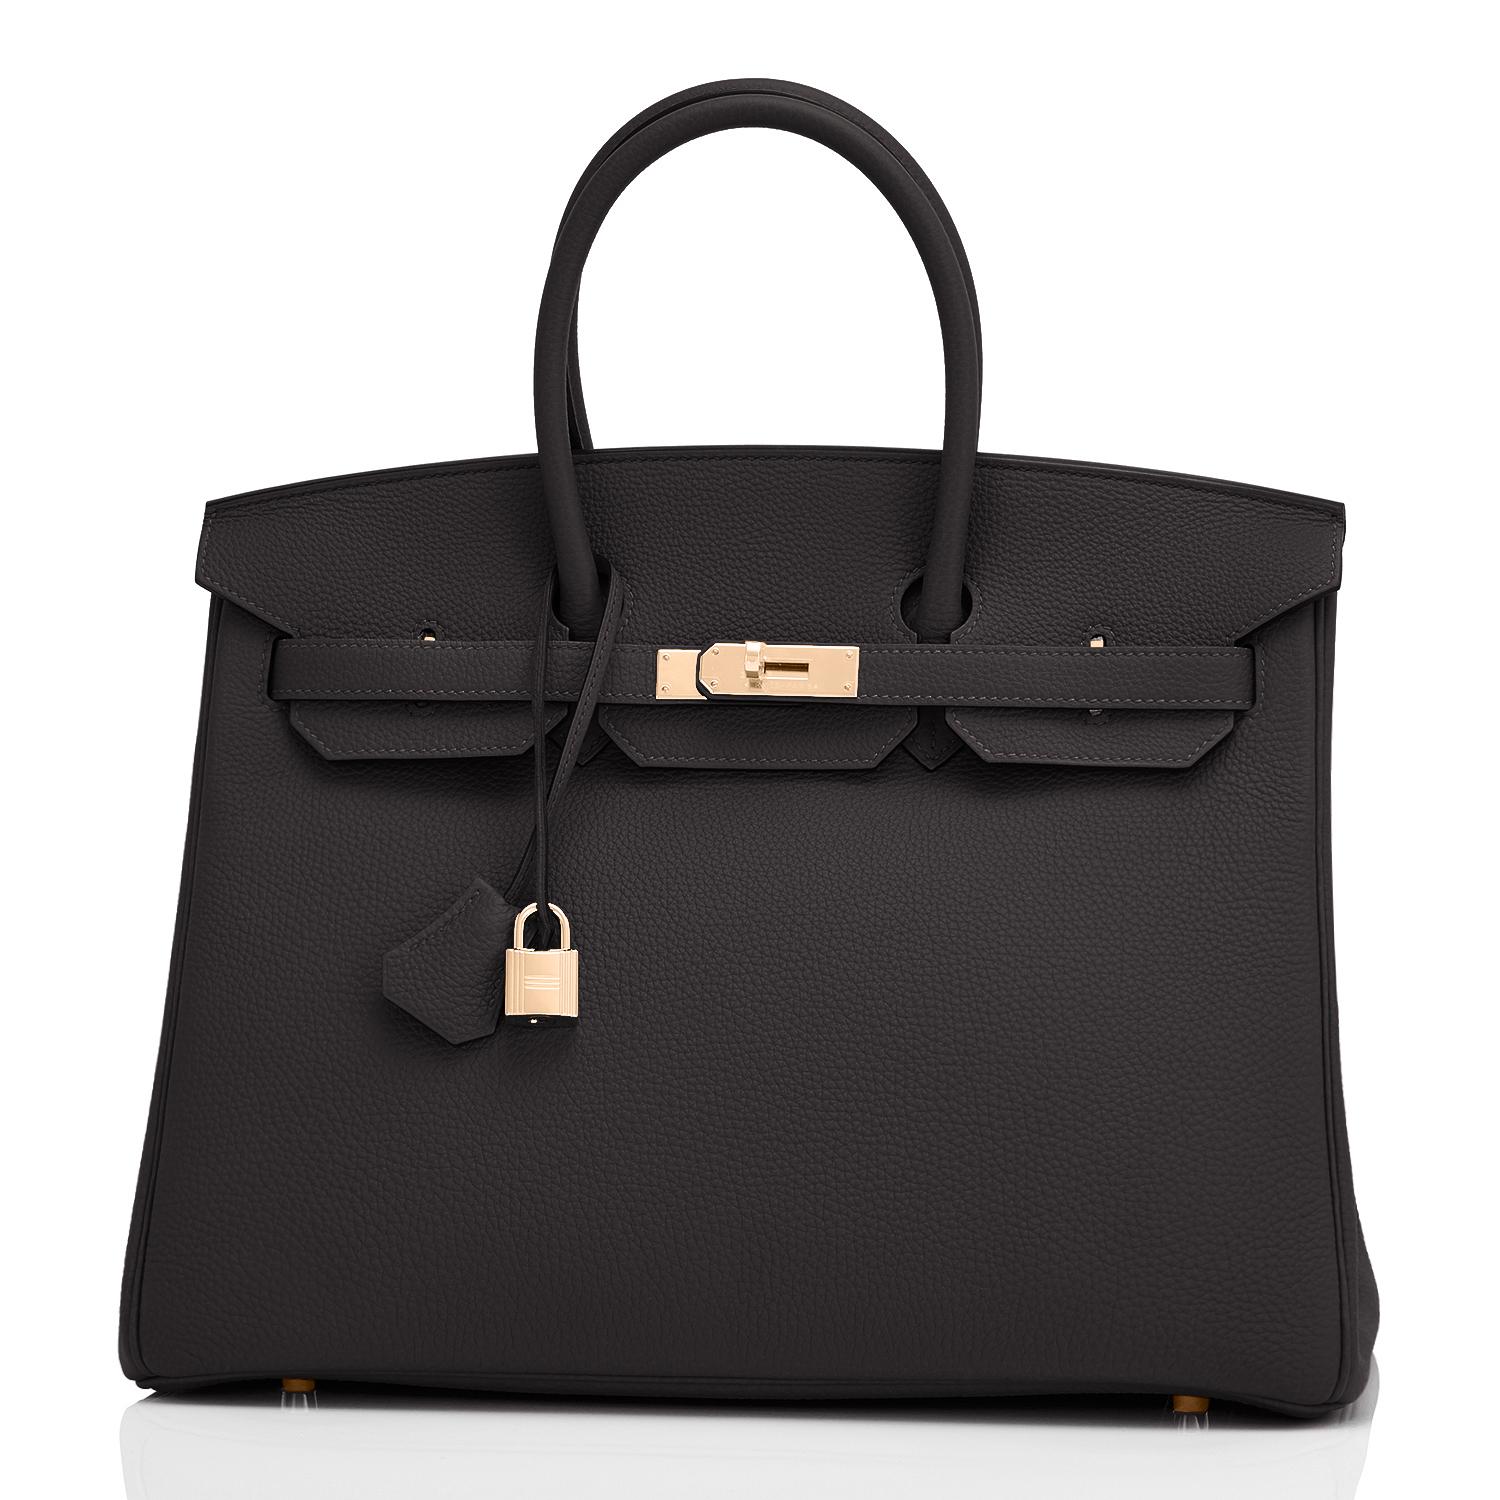 Hermes Birkin 35cm Black Rose Gold Hardware Togo Bag U Stamp, 2022
Perfect gift! Black with Rose Gold is soooo pretty in person!
Just purchased from Hermes store; bag bears new 2022 interior U stamp.
Brand New in Box. Store fresh. Pristine Condition